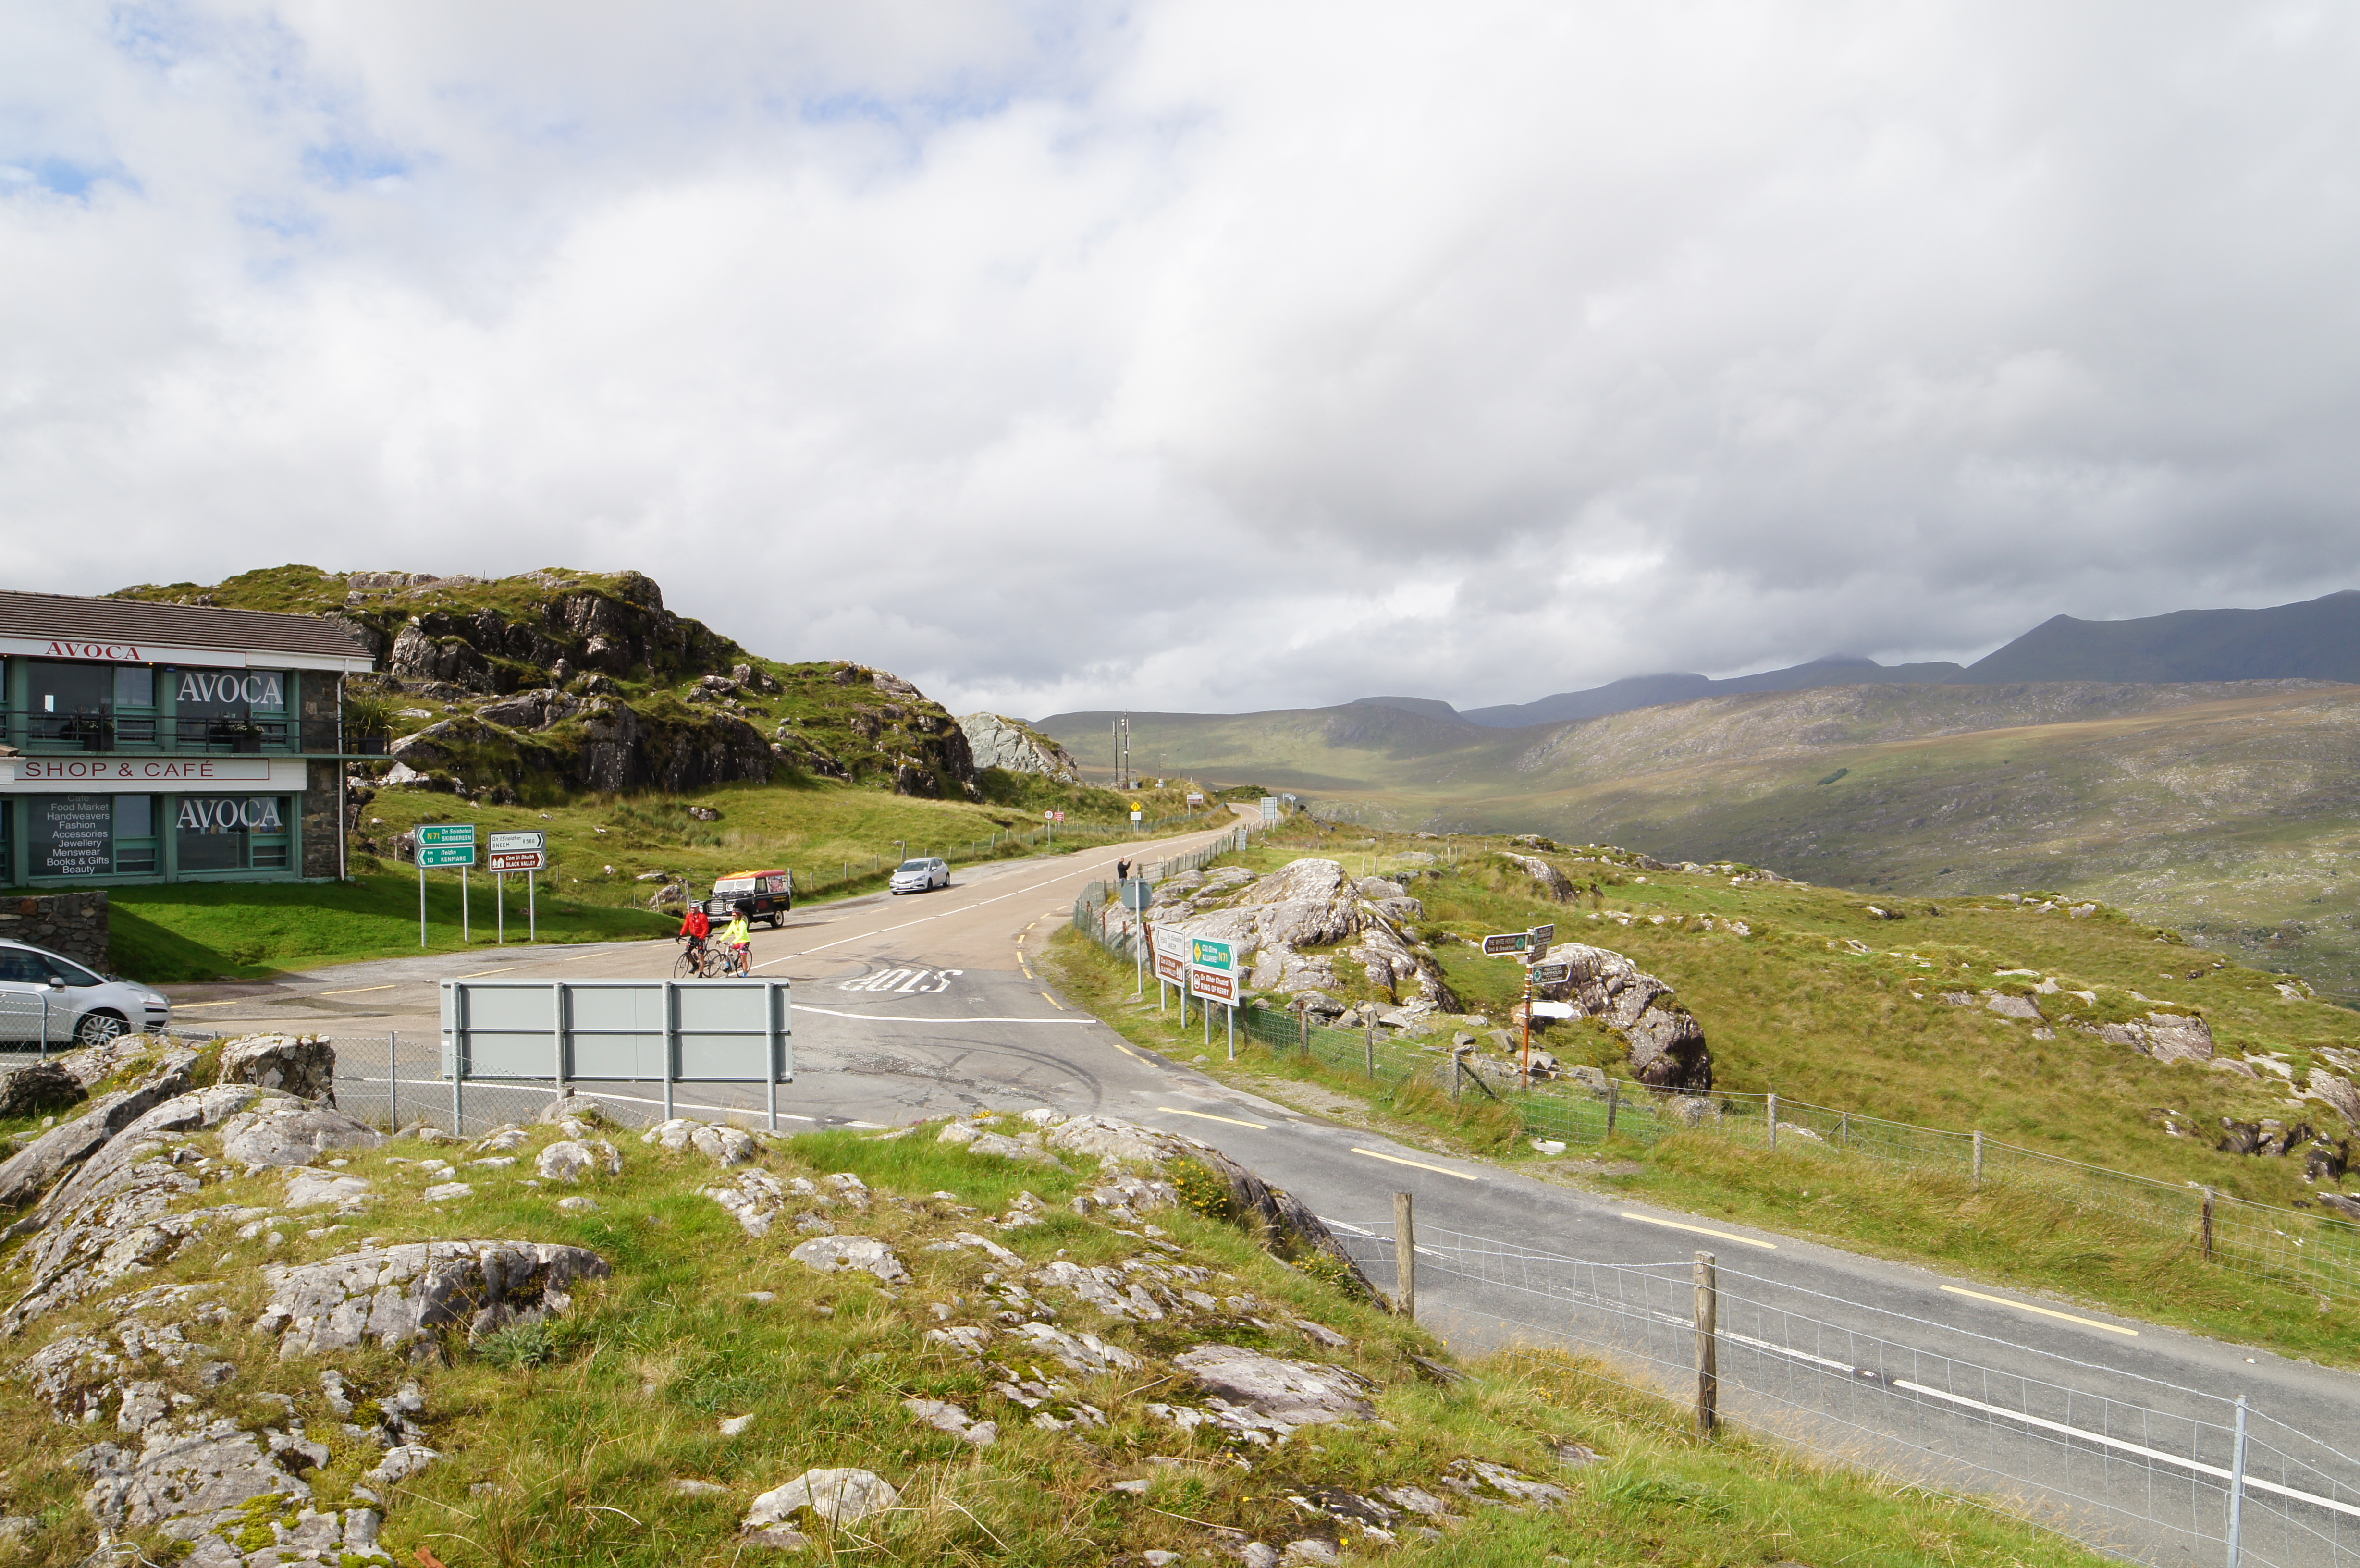 Moll's Gap, a good rest stop on the tour of Ring of Kerry